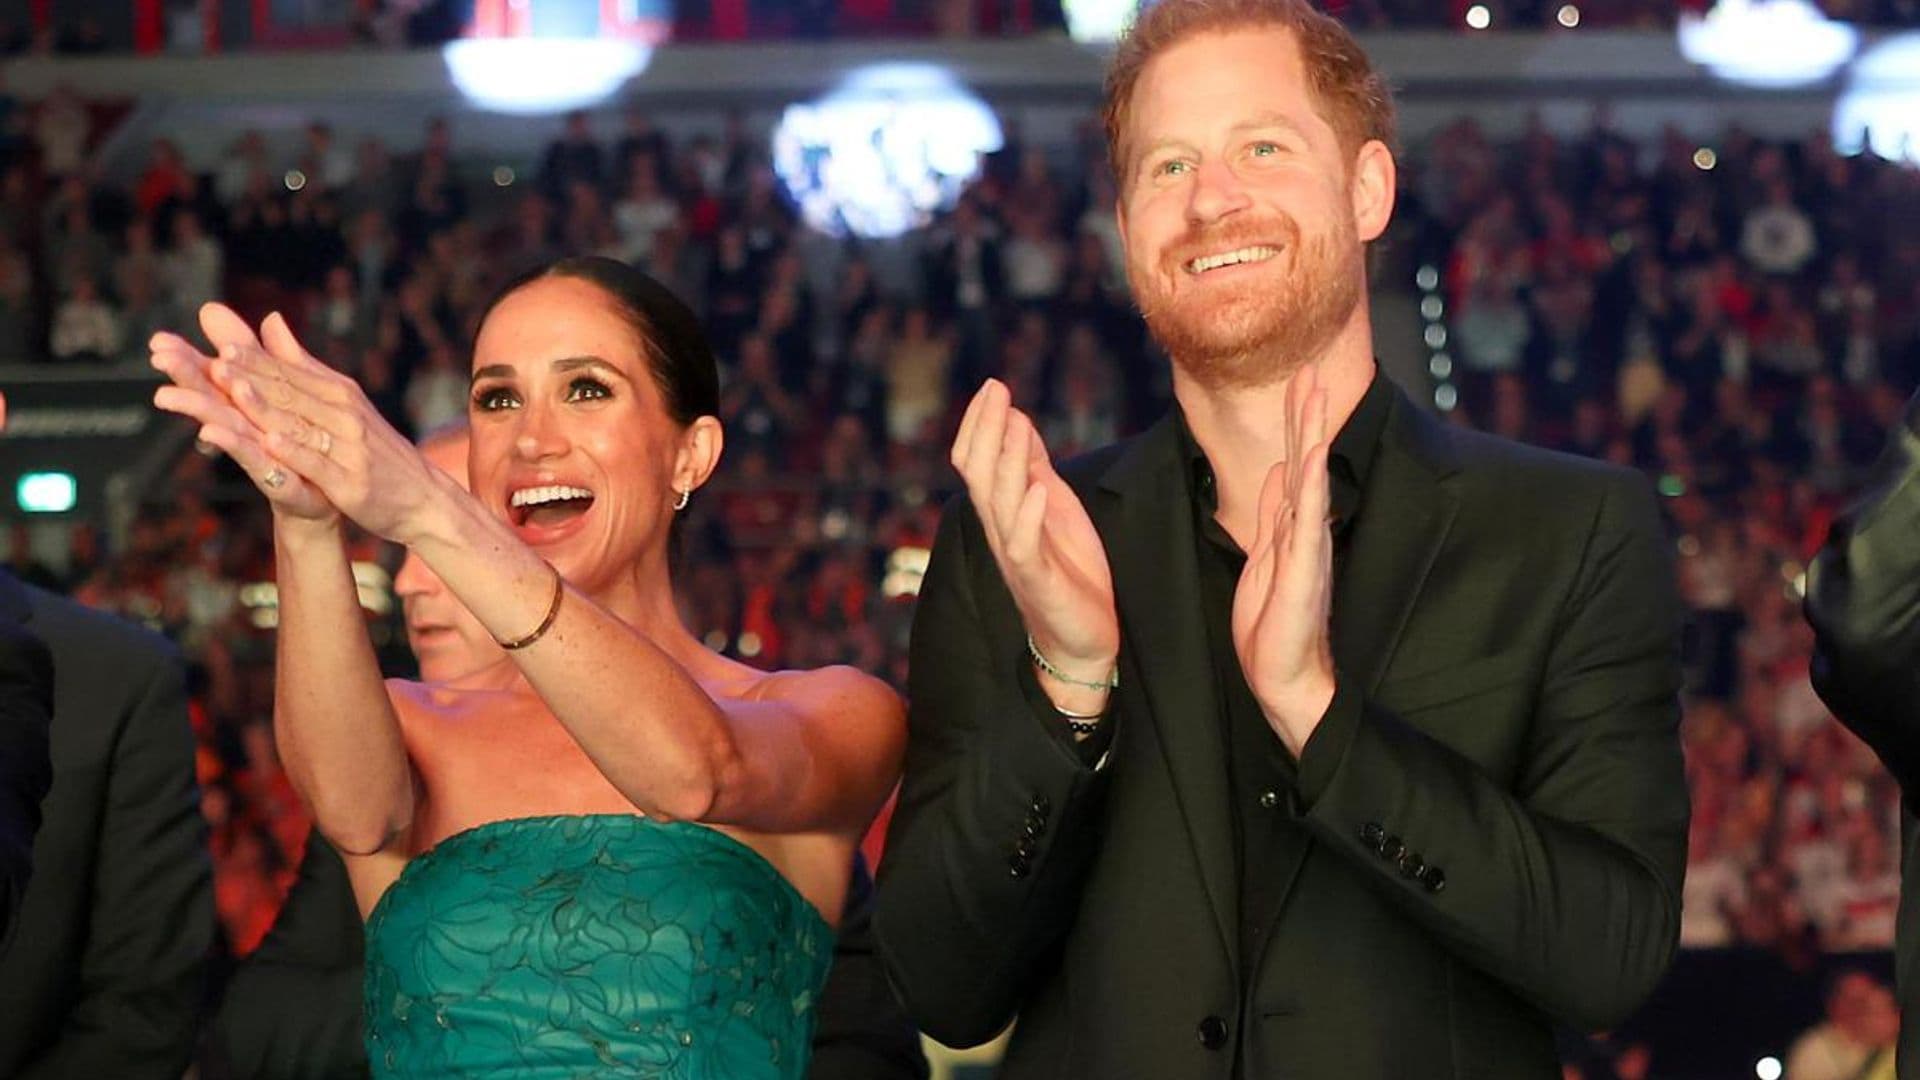 Meghan Markle and Prince Harry have night out in Vegas